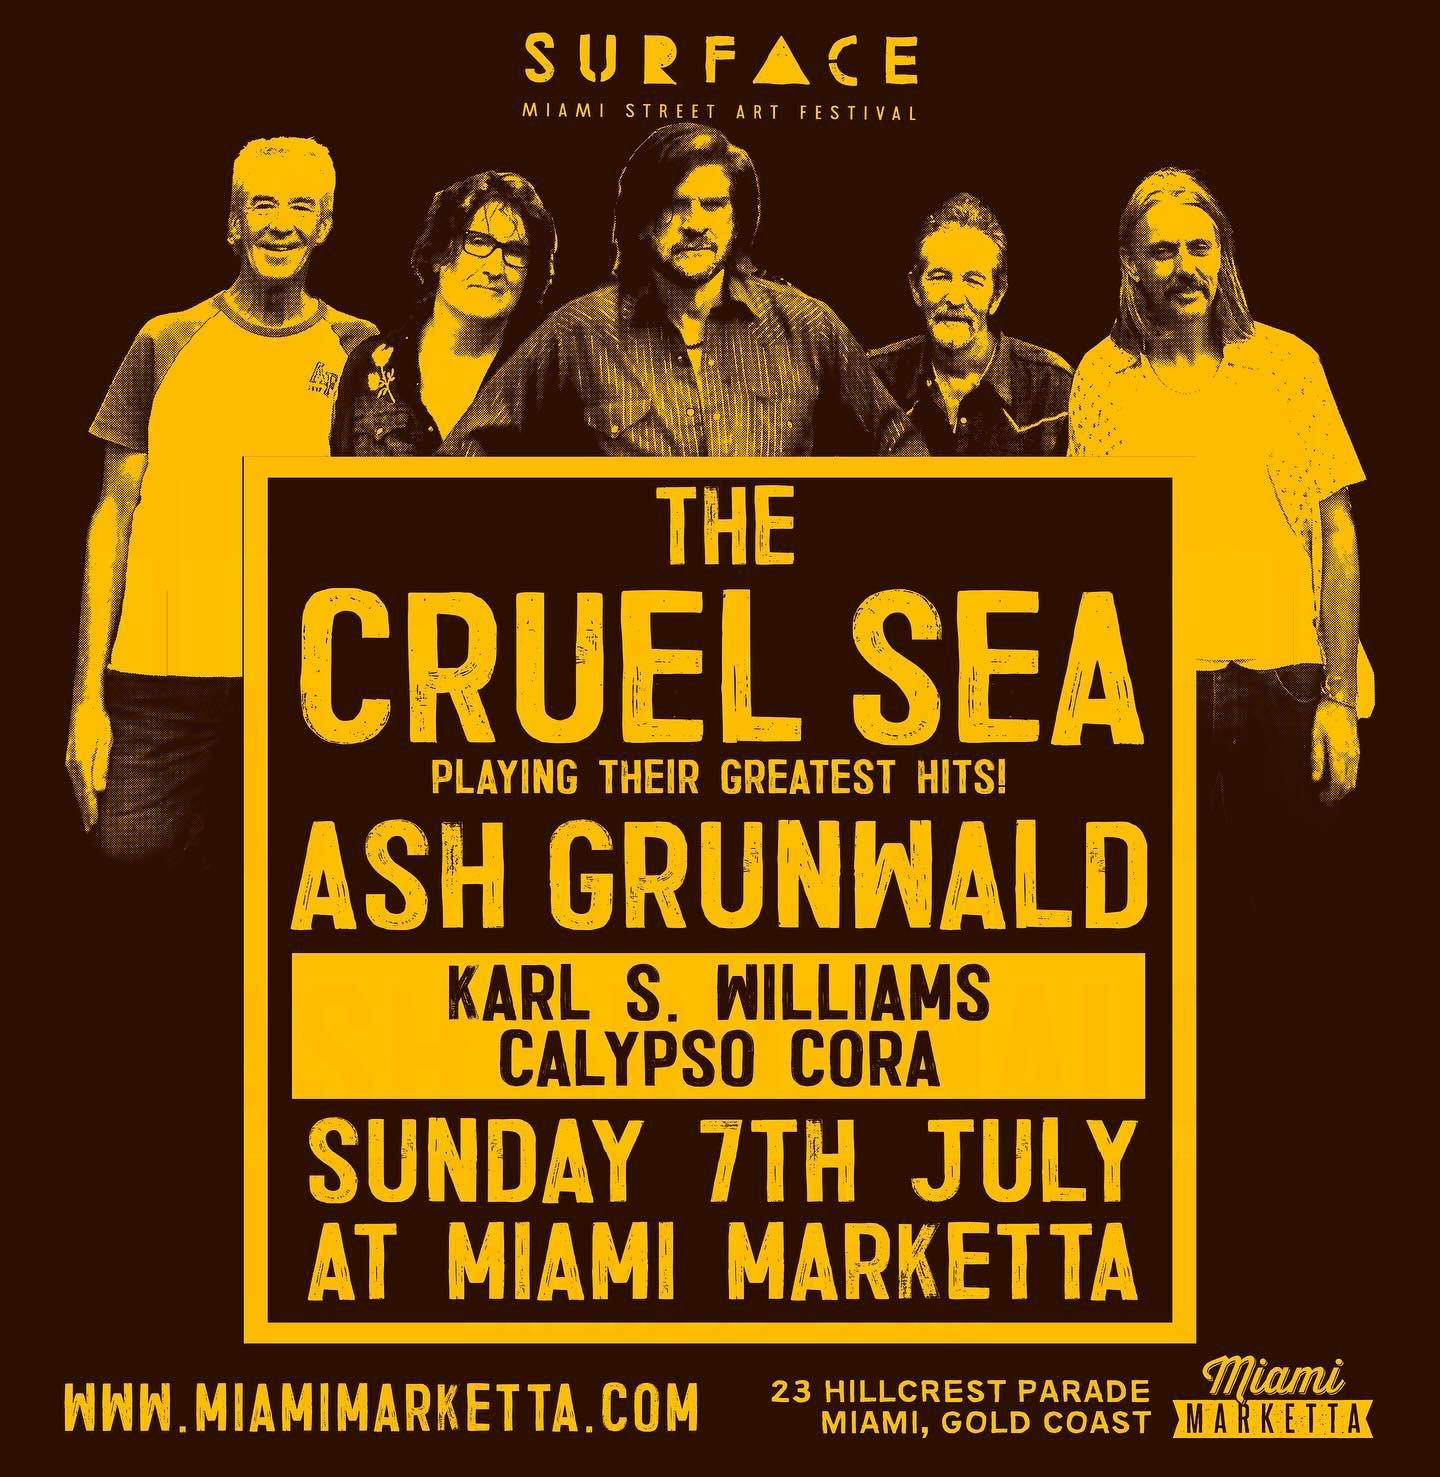 I&rsquo;ve been so excited to announce this one! ⚡️⚡️⚡️ We&rsquo;re playing with The Cruel Sea!! July 7 at Miami Marketta for the SURFACE FESTIVAL closing party with Ash Grunwald and Calypso Cora. Bringing the electrified blues duo with @sal_drums 👌